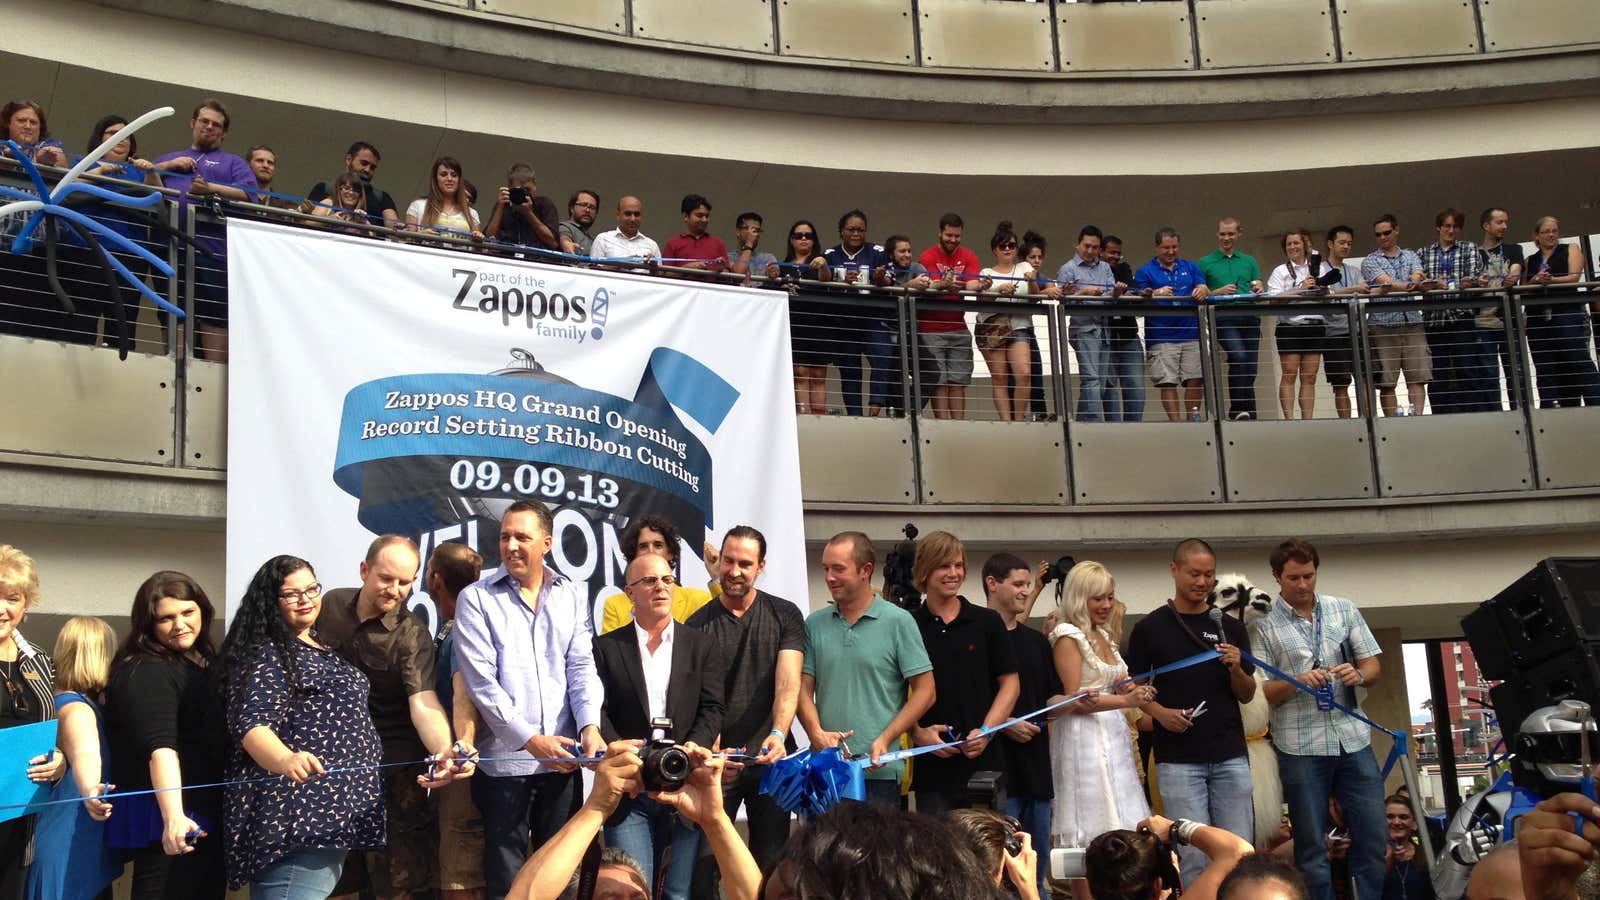 In September, Zappos got a new home, now the company is about to get an internal makeover.